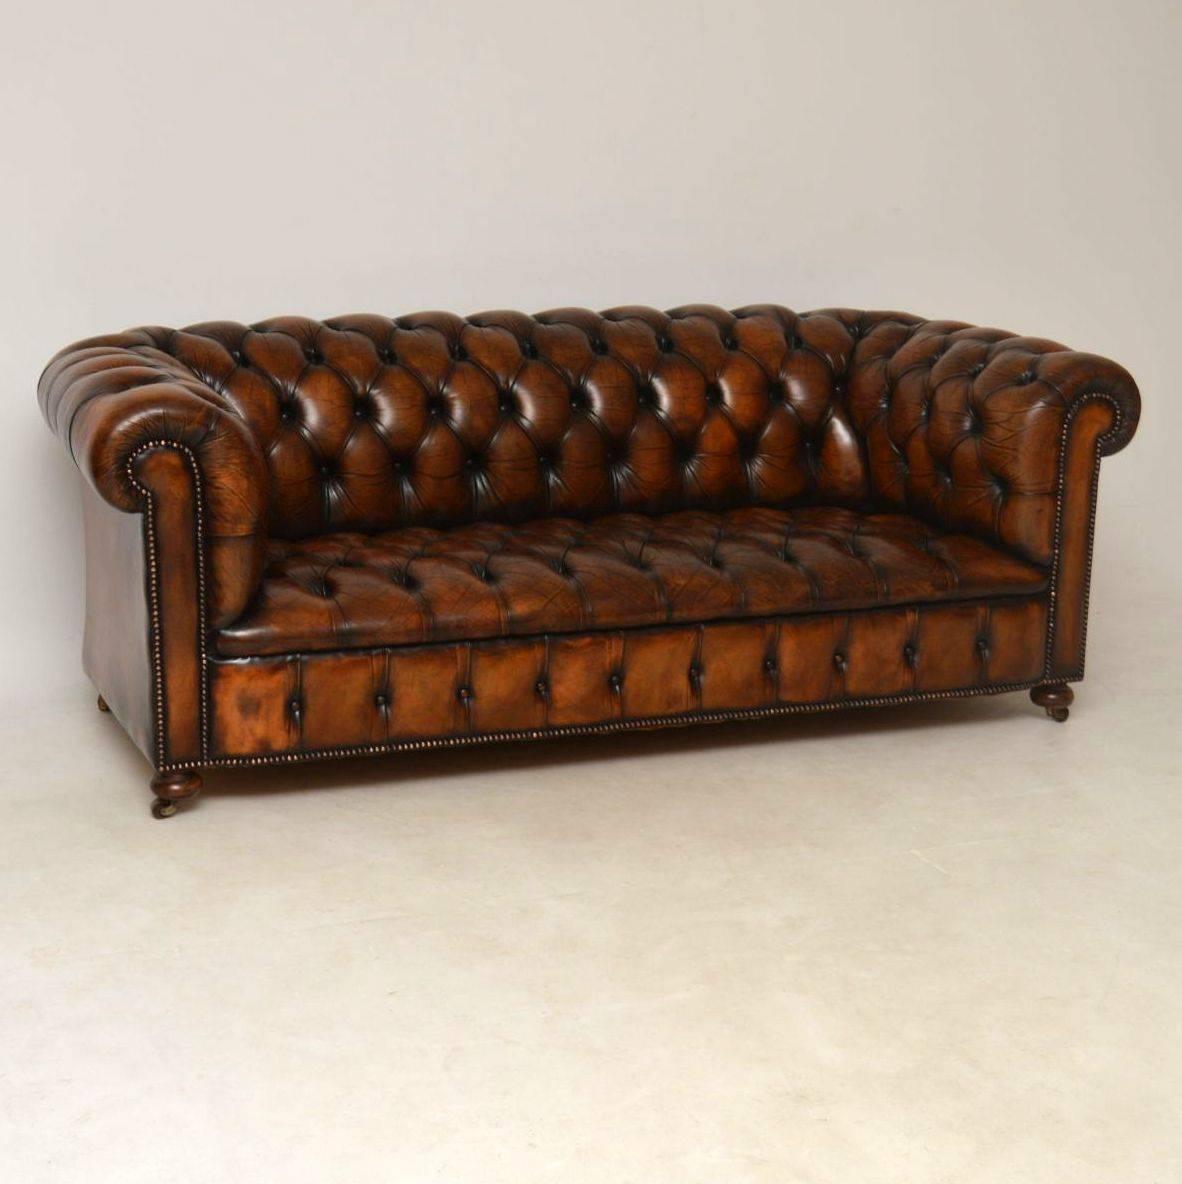 It's been a long time since I got hold of a leather Chesterfield sofa and this one is a lovely model. The leather is in good condition with a wonderful original antique look. There are no splits, tears or holes & the leather has just been